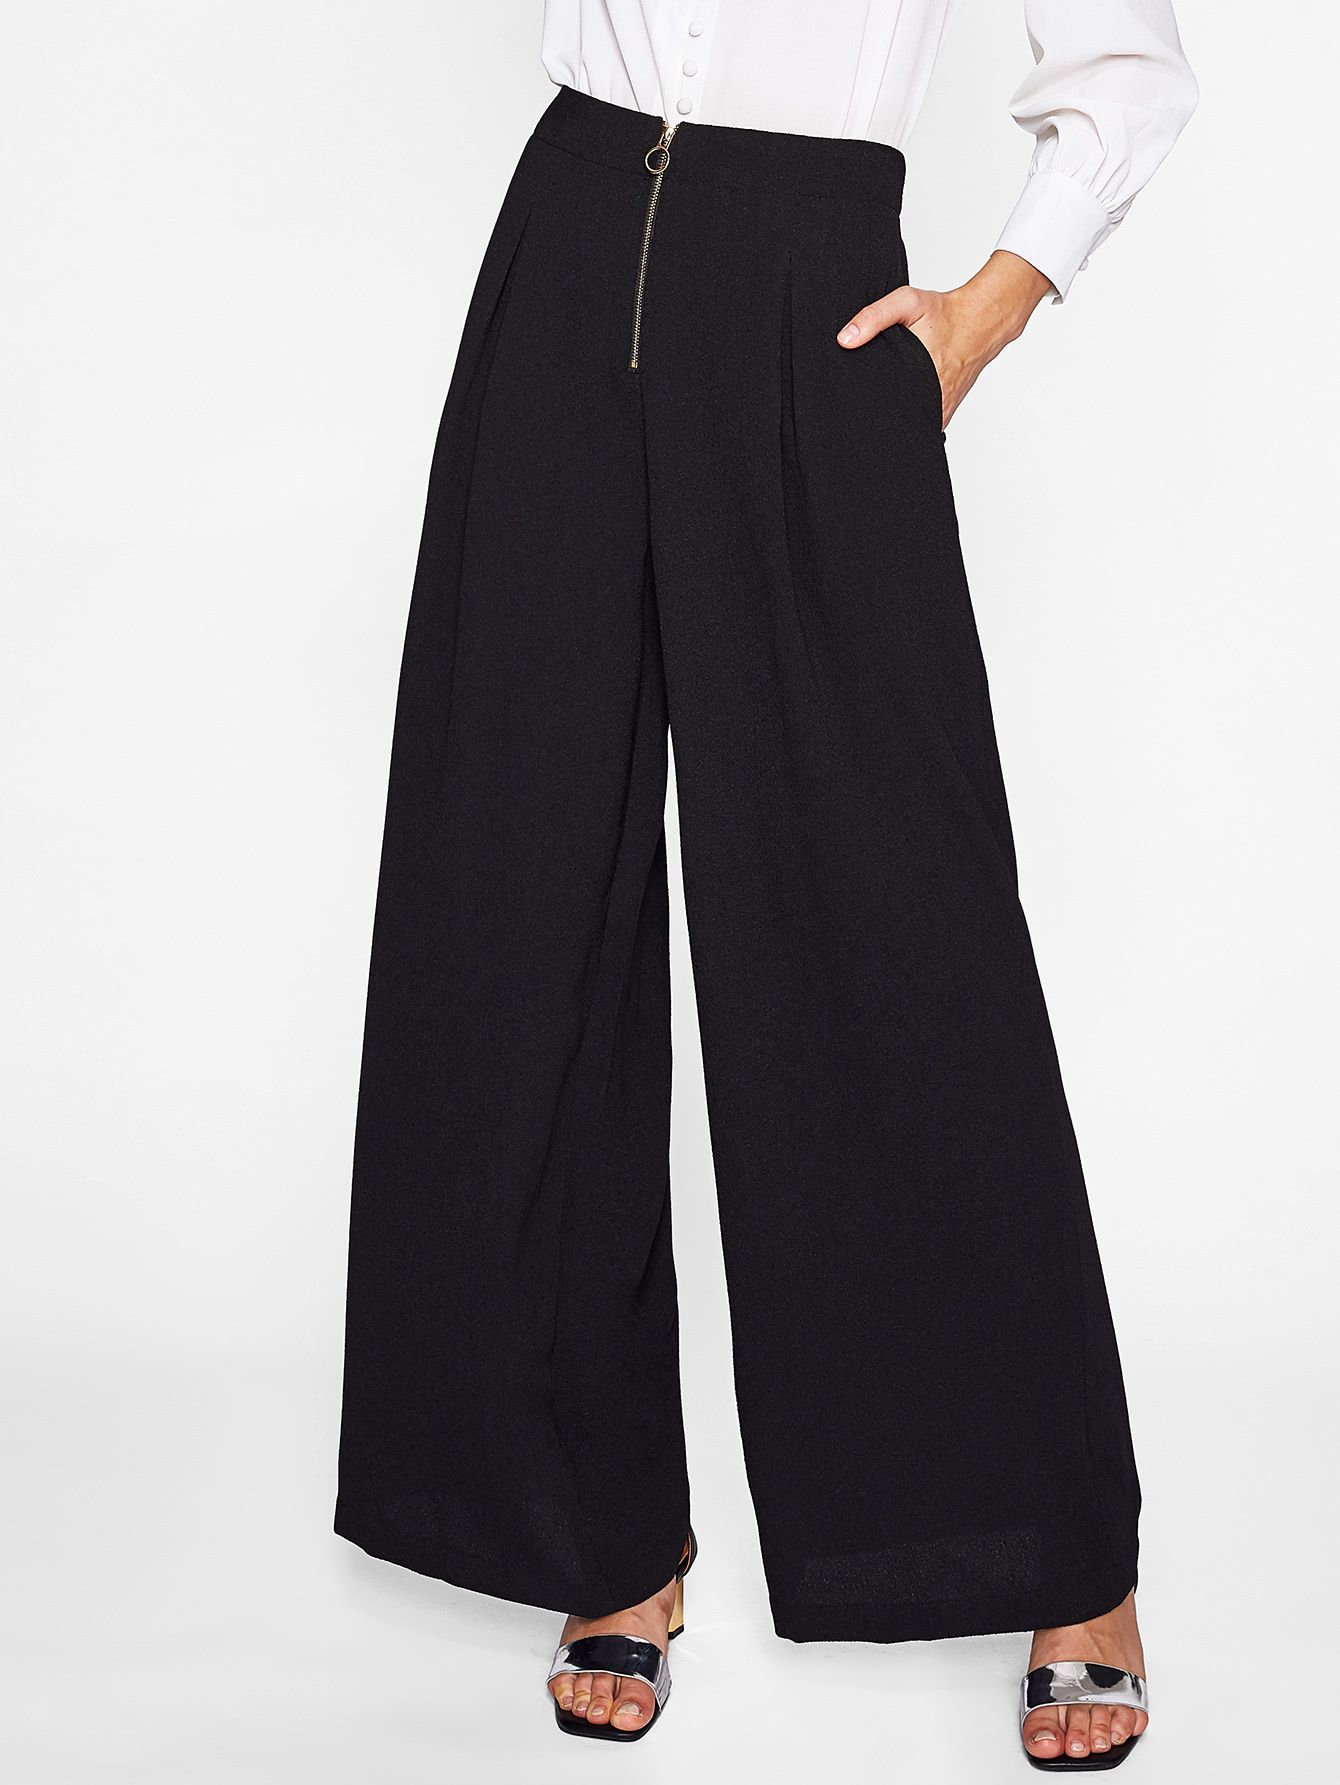 Exposed Zip Front Fold Pleat Palazzo Pants | SHEIN